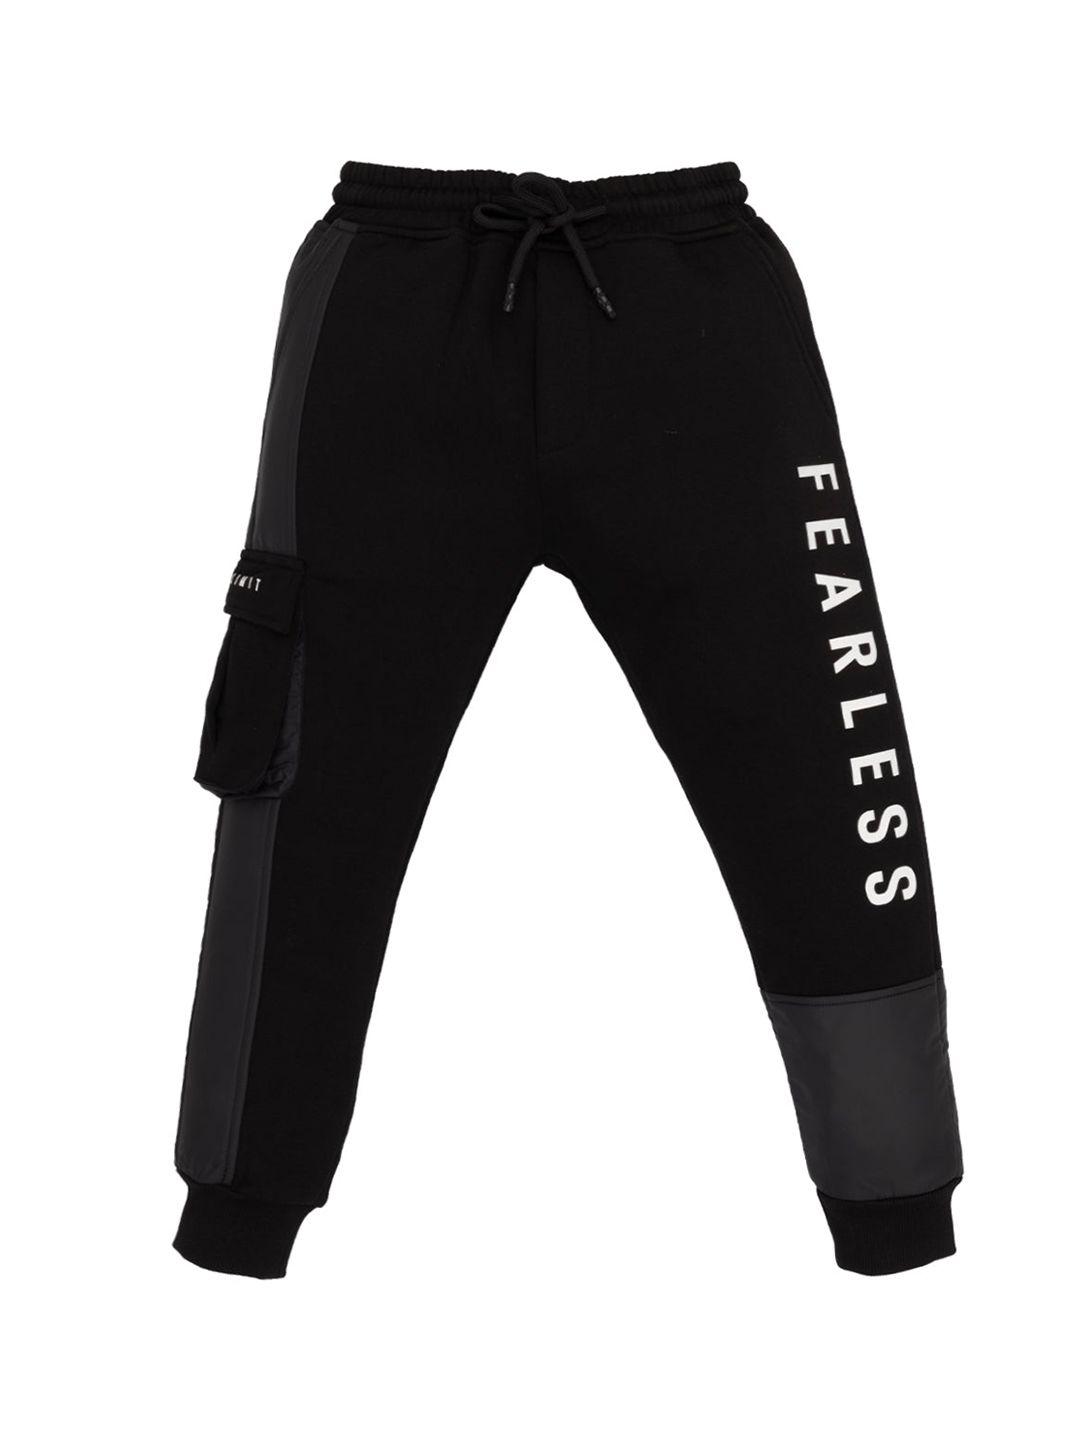 status quo boys typography printed mid rise stretchable joggers